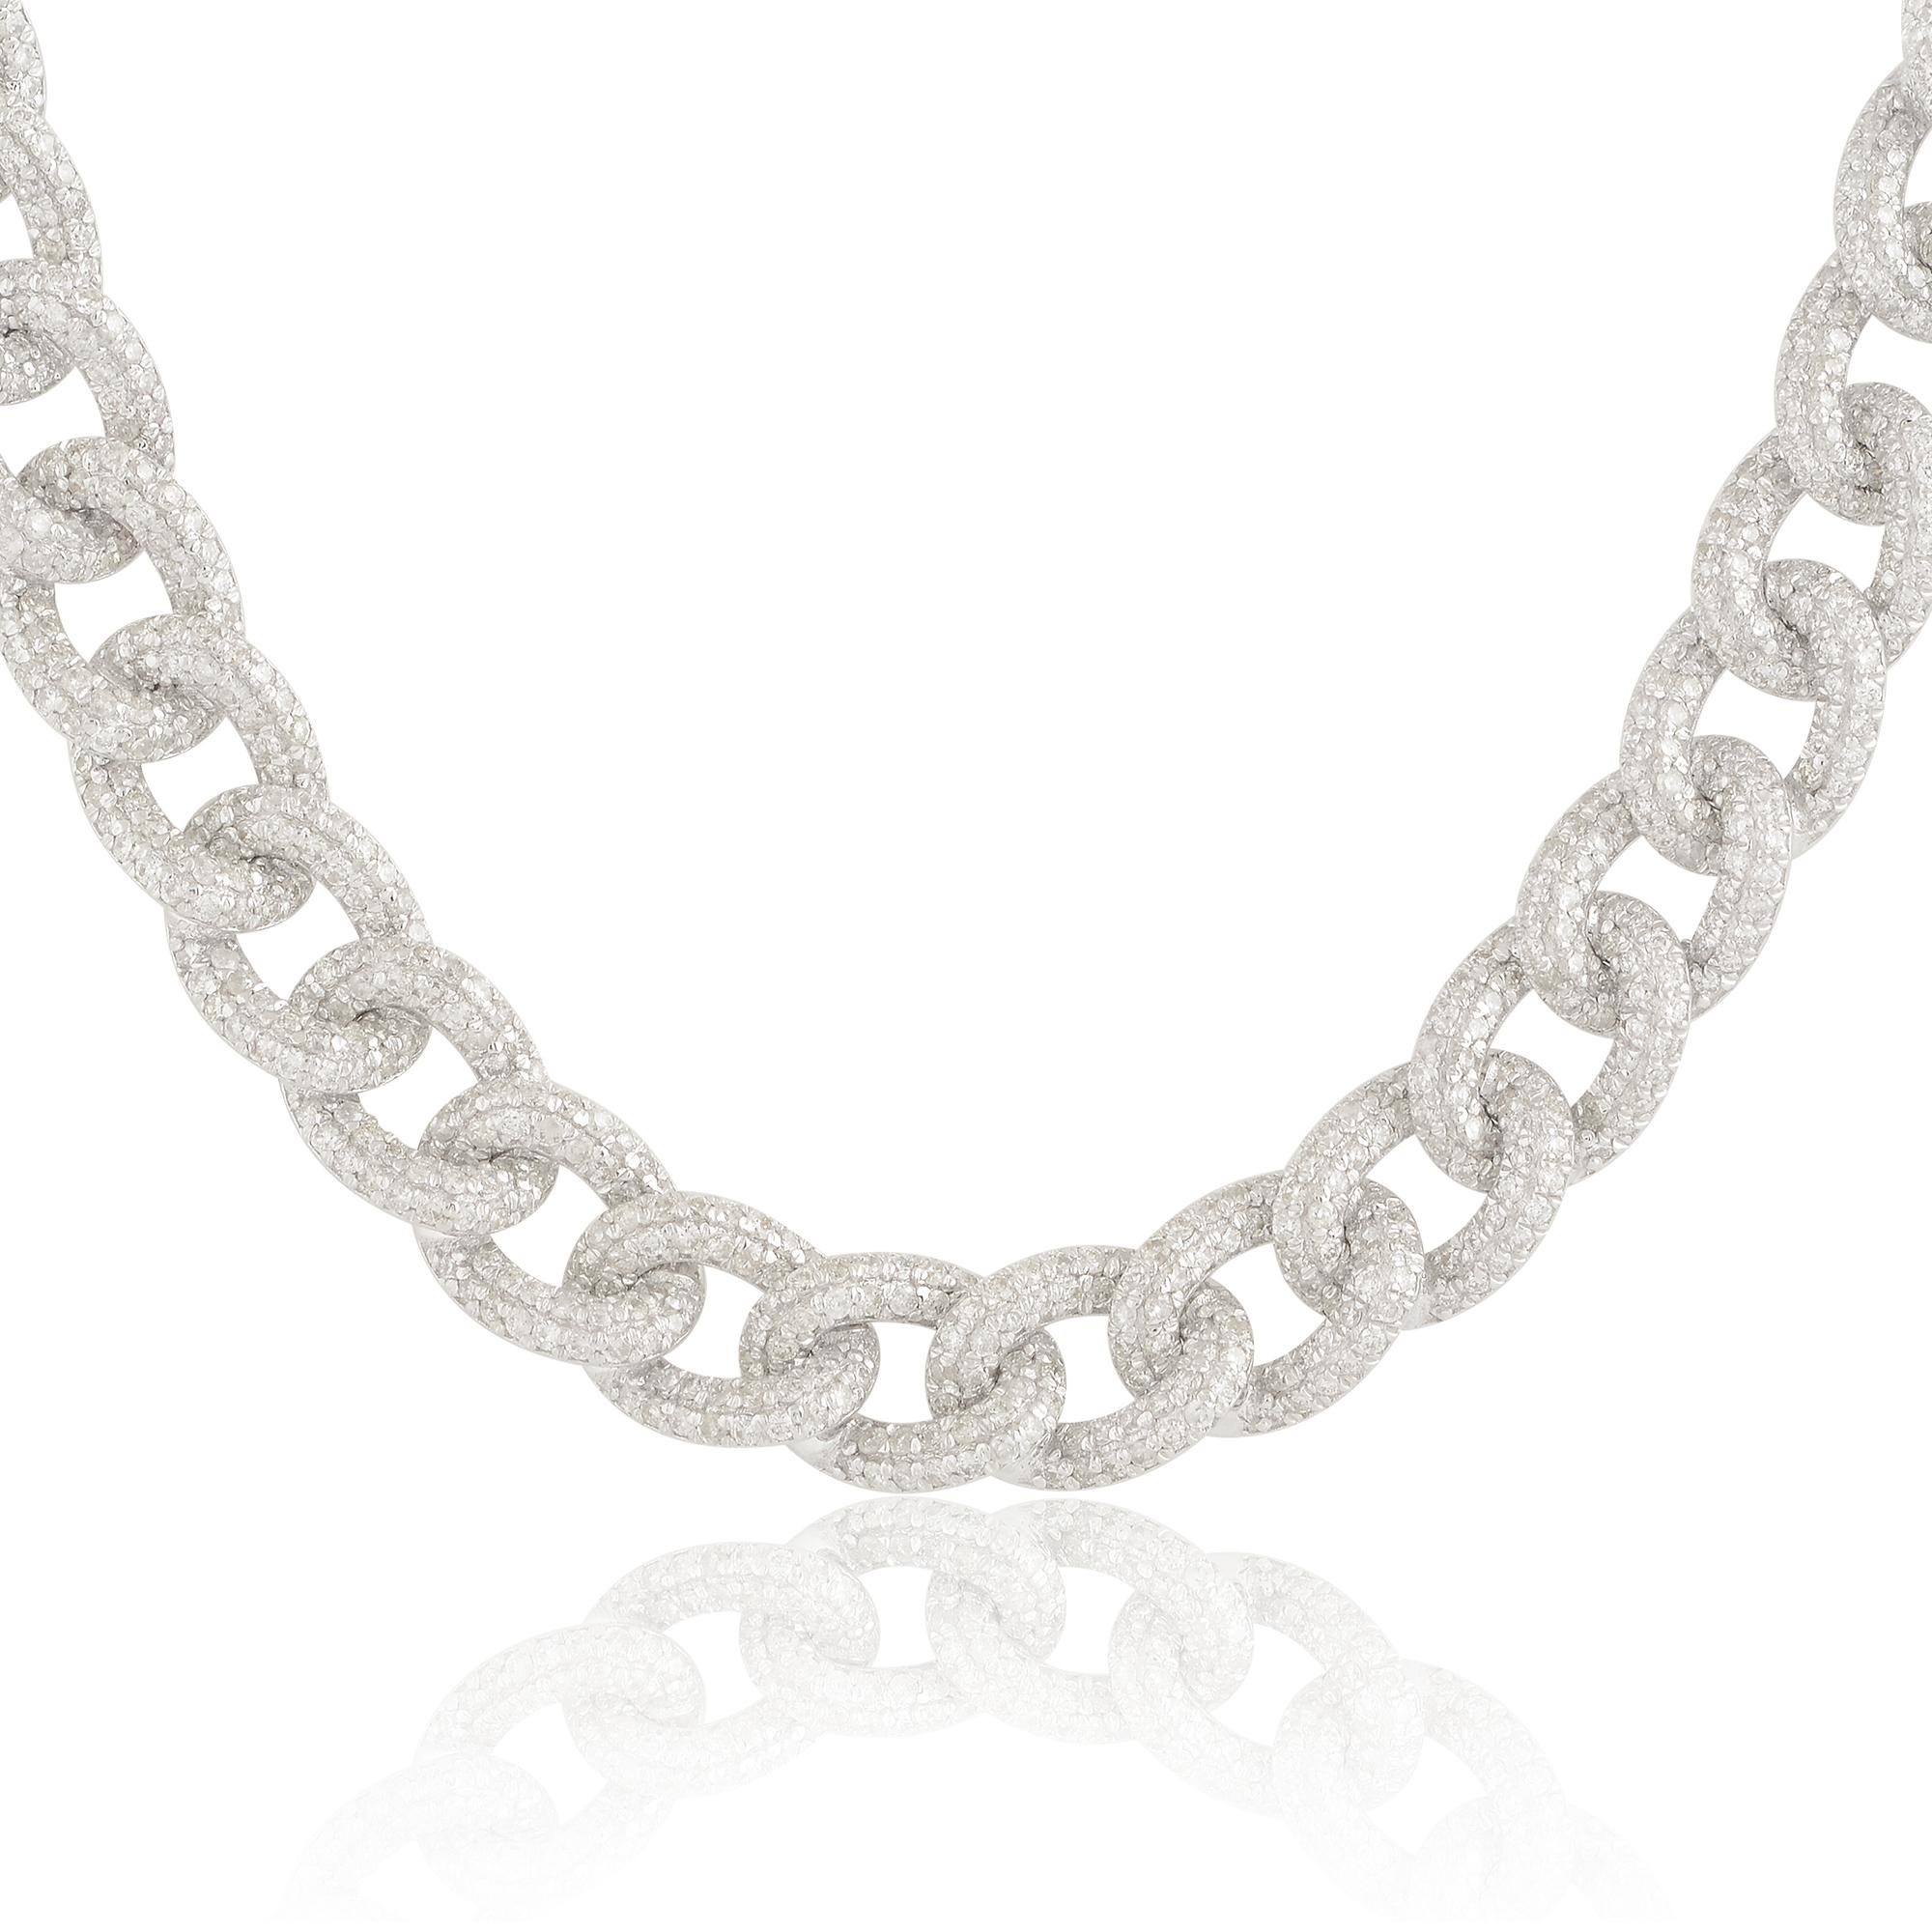 Crafted from 18 karat white gold, the setting of the necklace provides a stunning backdrop for the diamonds. The white gold complements the diamonds' brilliance, allowing them to take center stage and captivate the eye. Its lustrous finish adds a